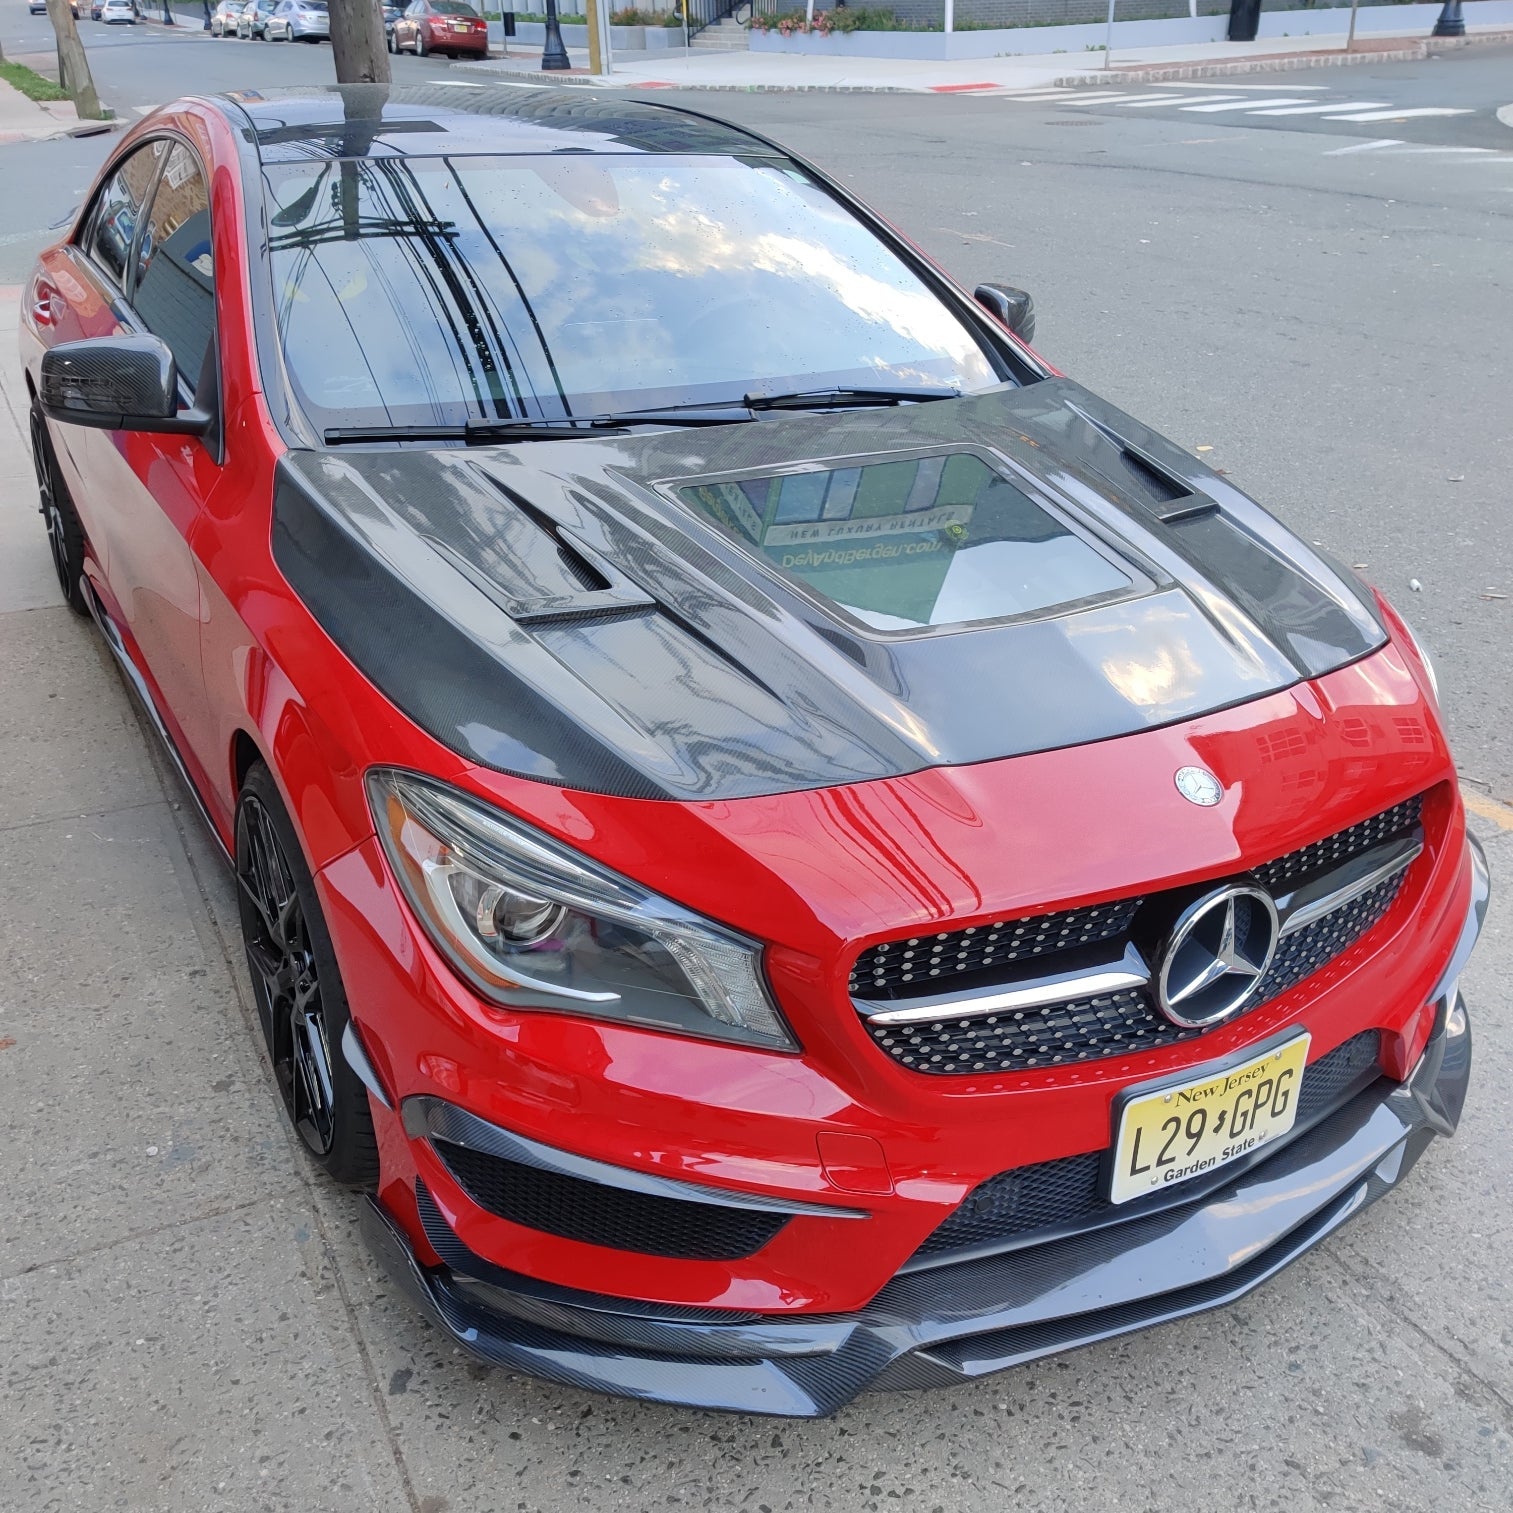 Aero Republic Tempered Glass Hood Bonnet Clearview for Mercedes benz C117 2014-2019 CLA250 CLA45 AMG